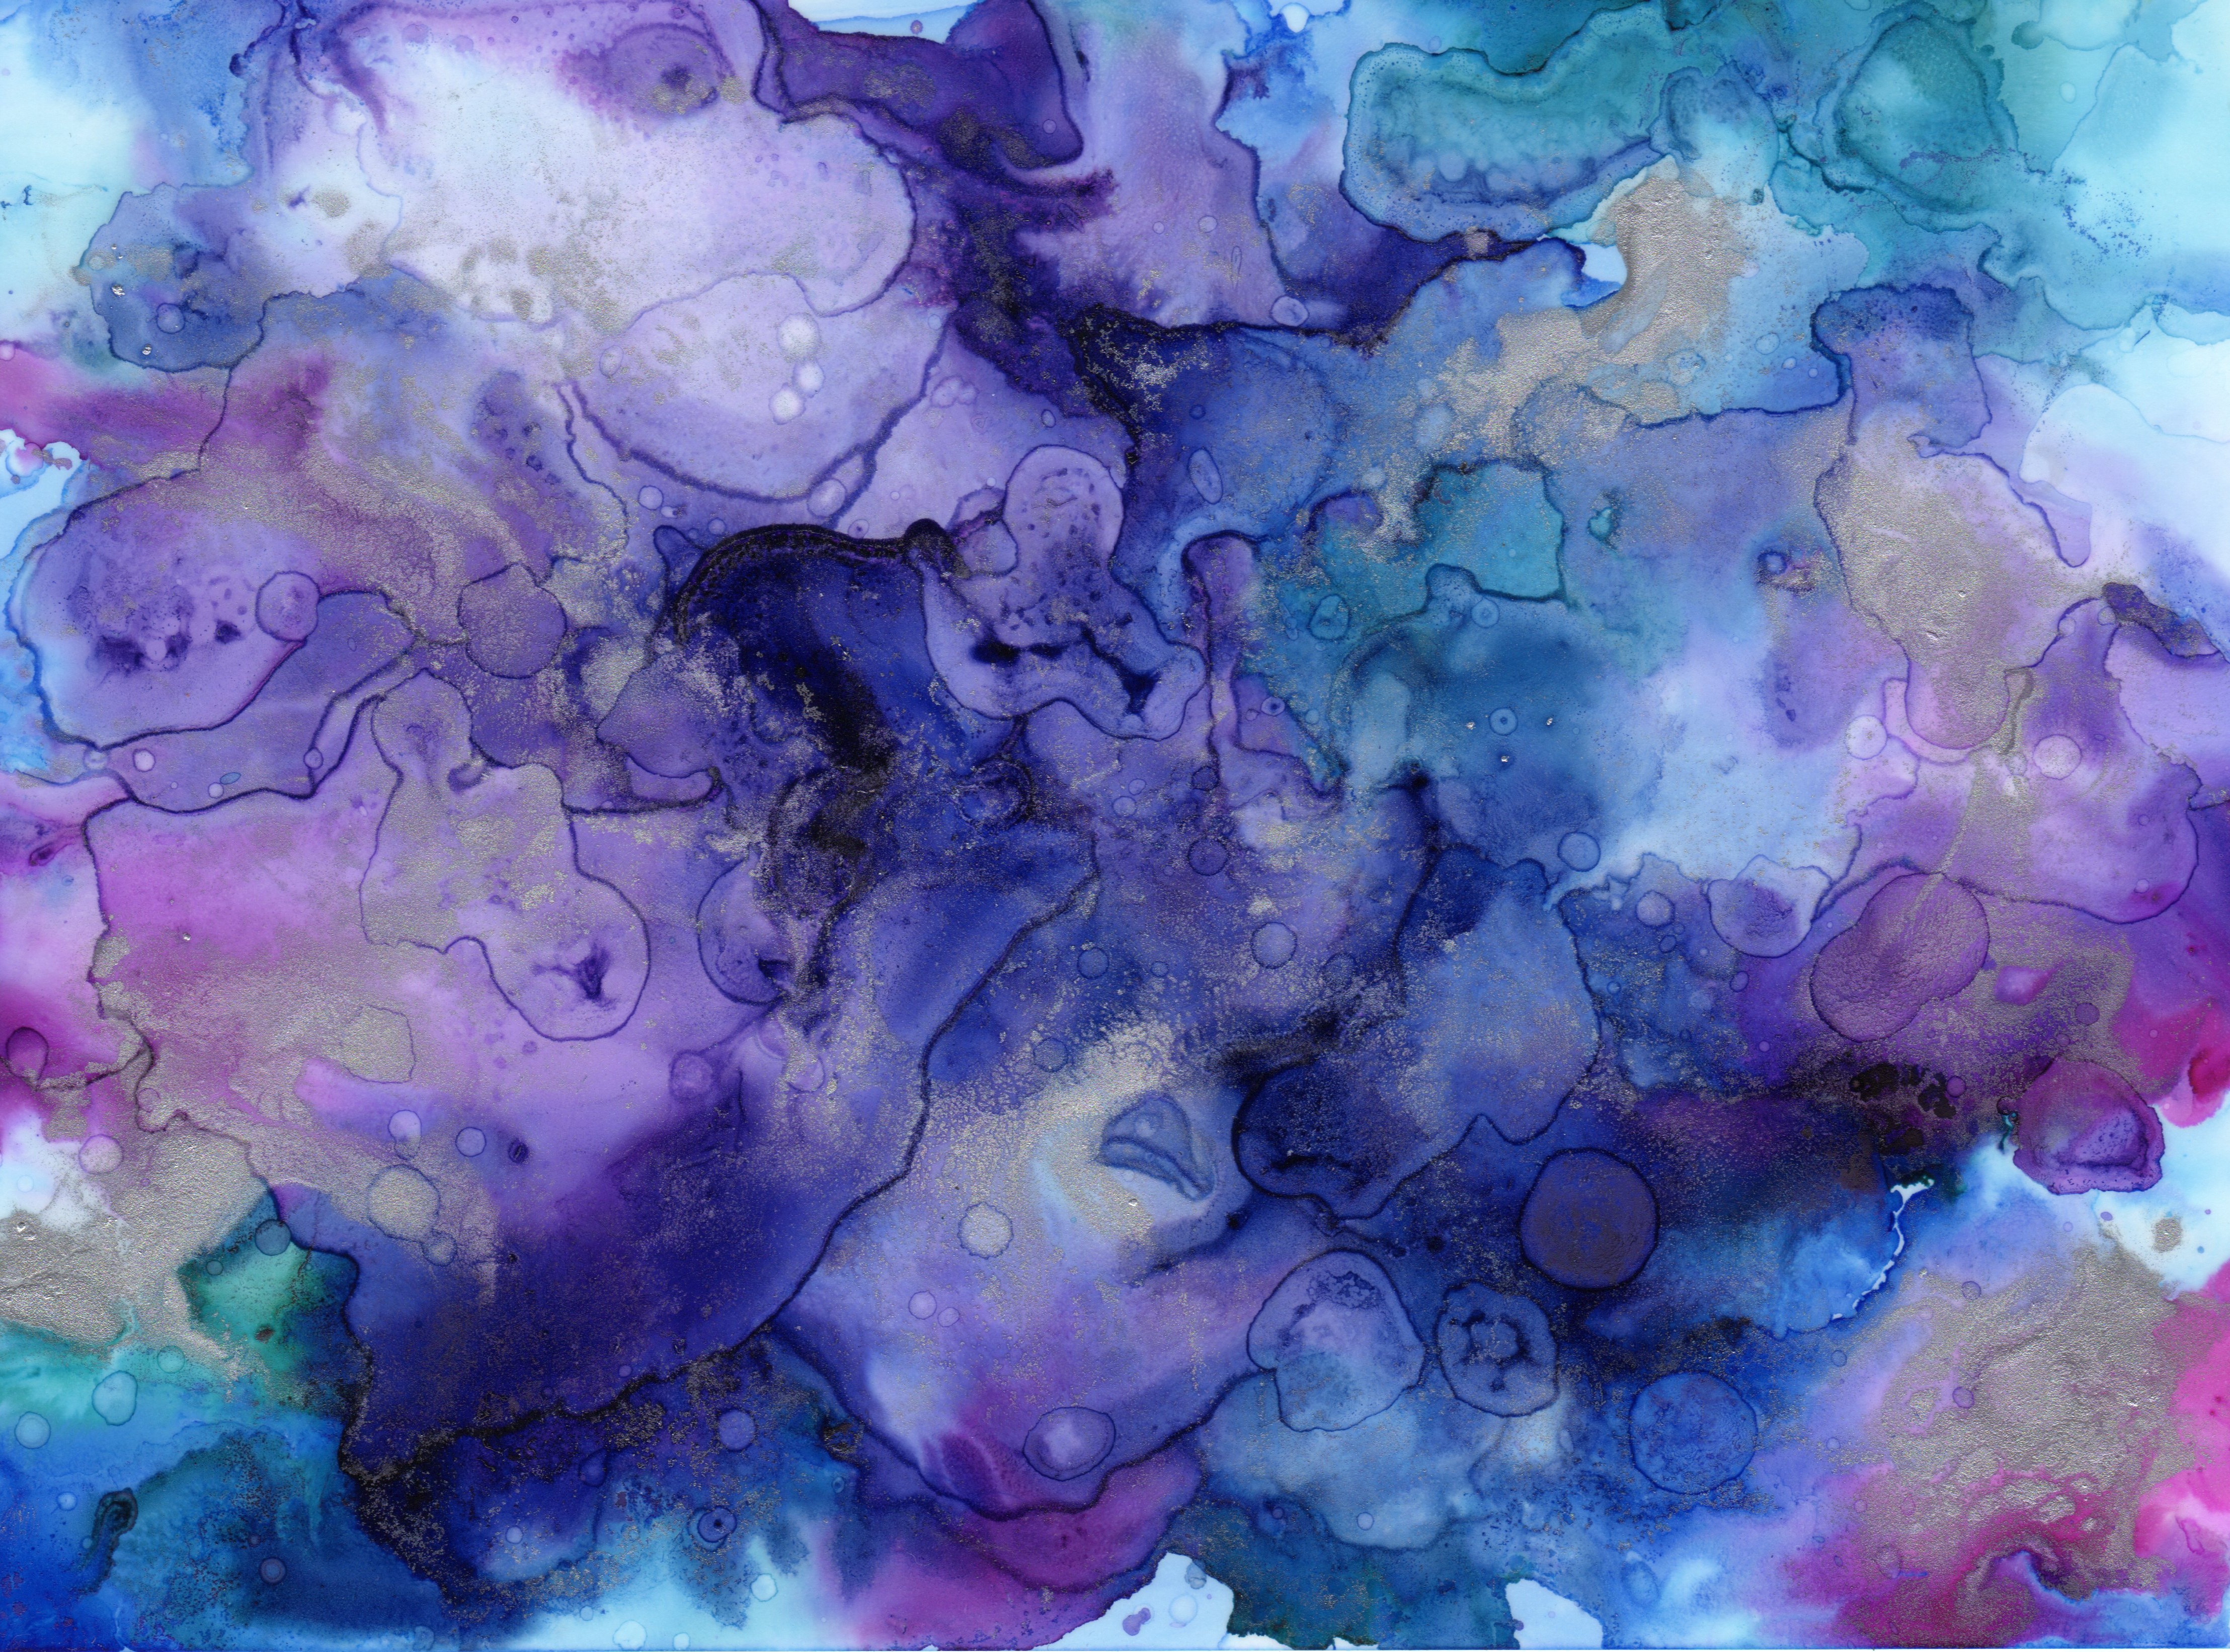 110446 download wallpaper abstract, paint, stains, spots, ink, watercolor screensavers and pictures for free